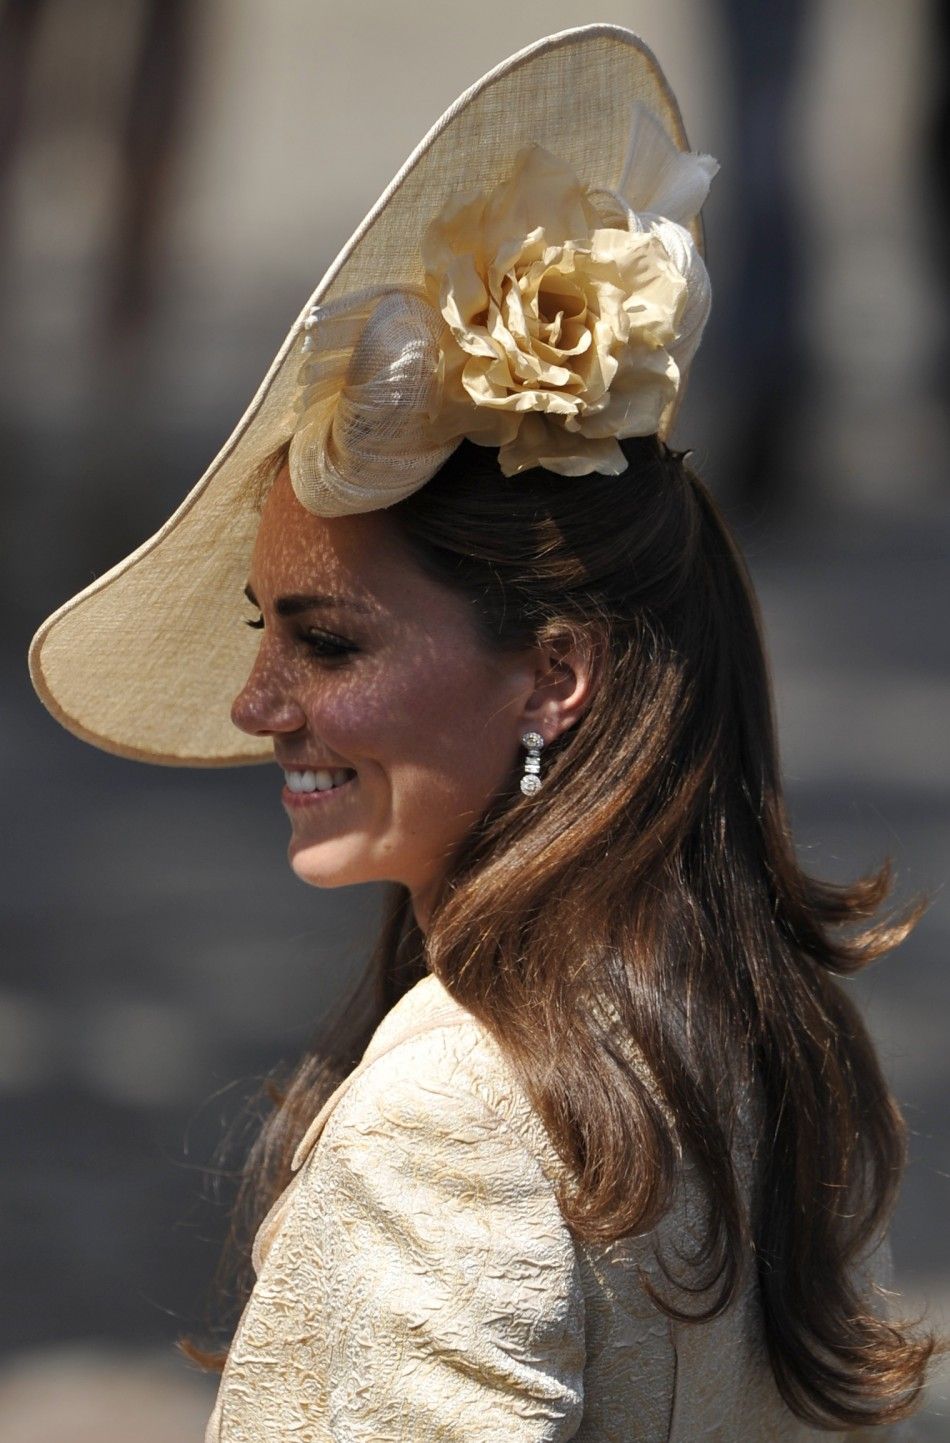 All Smiles An Endearing Catherine Middleton Adds Charm to Zaras Wedding